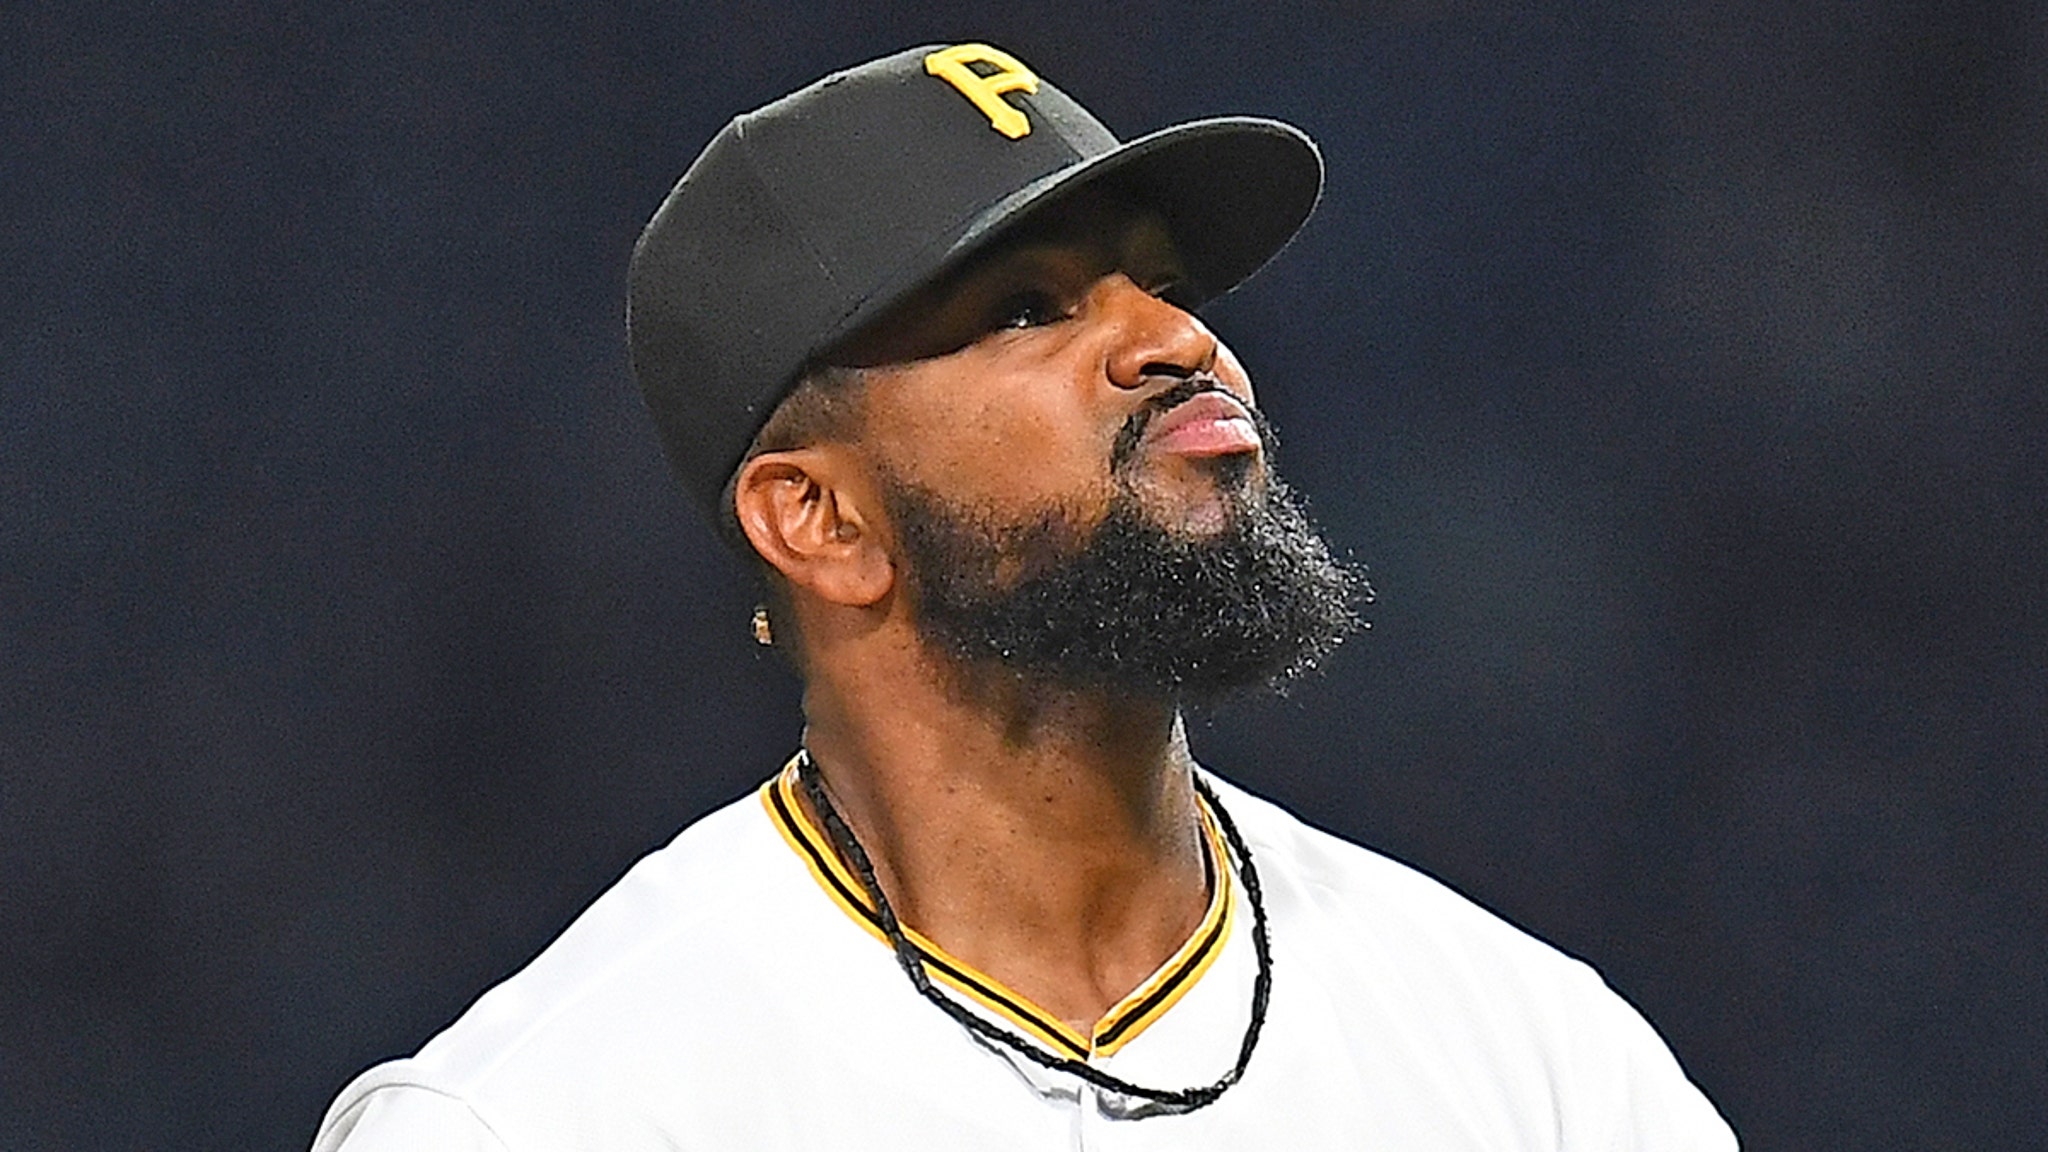 Ex-Pittsburgh Pirates pitcher Felipe Vazquez, 30, is jailed for up to 4  years for sex assault on girl, 13